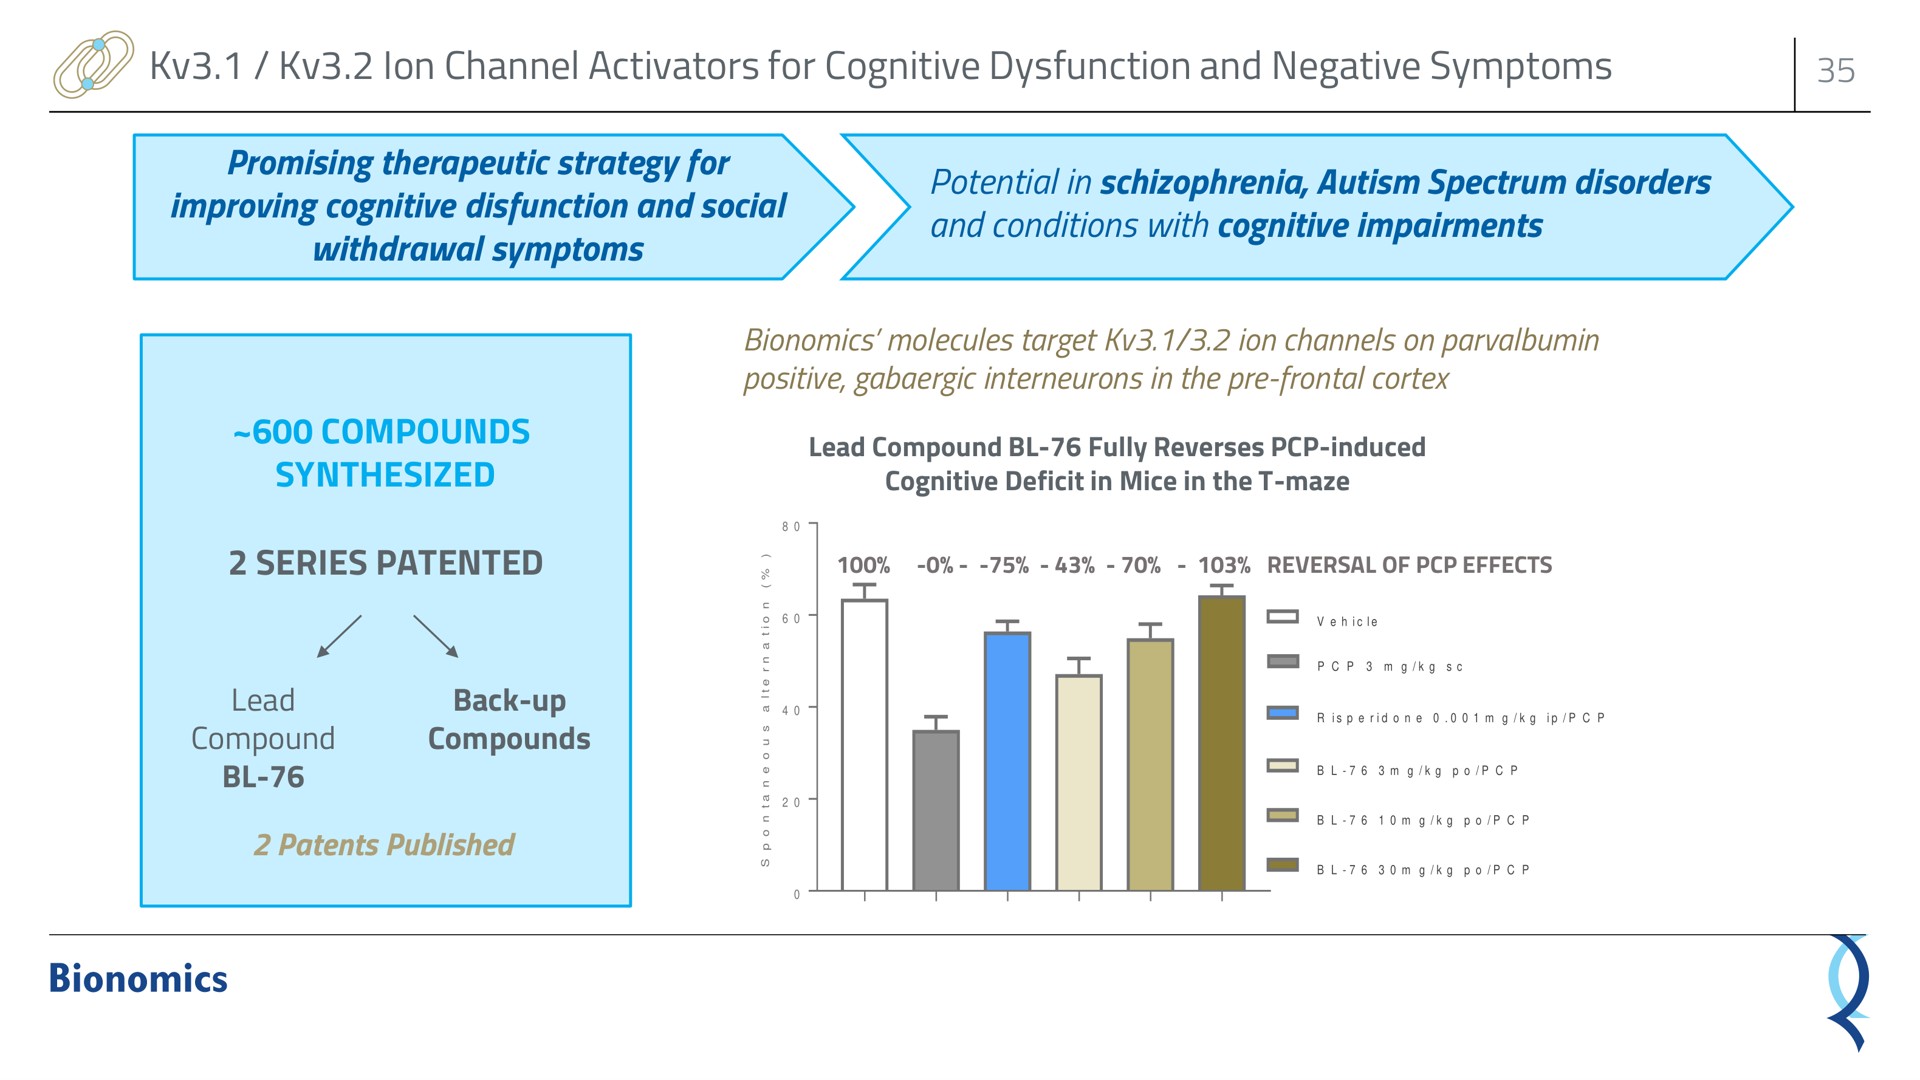 ion channel activators for cognitive dysfunction and negative symptoms promising therapeutic strategy for improving cognitive and social withdrawal symptoms potential in schizophrenia autism spectrum disorders and conditions with cognitive impairments compounds synthesized series patented | Bionomics